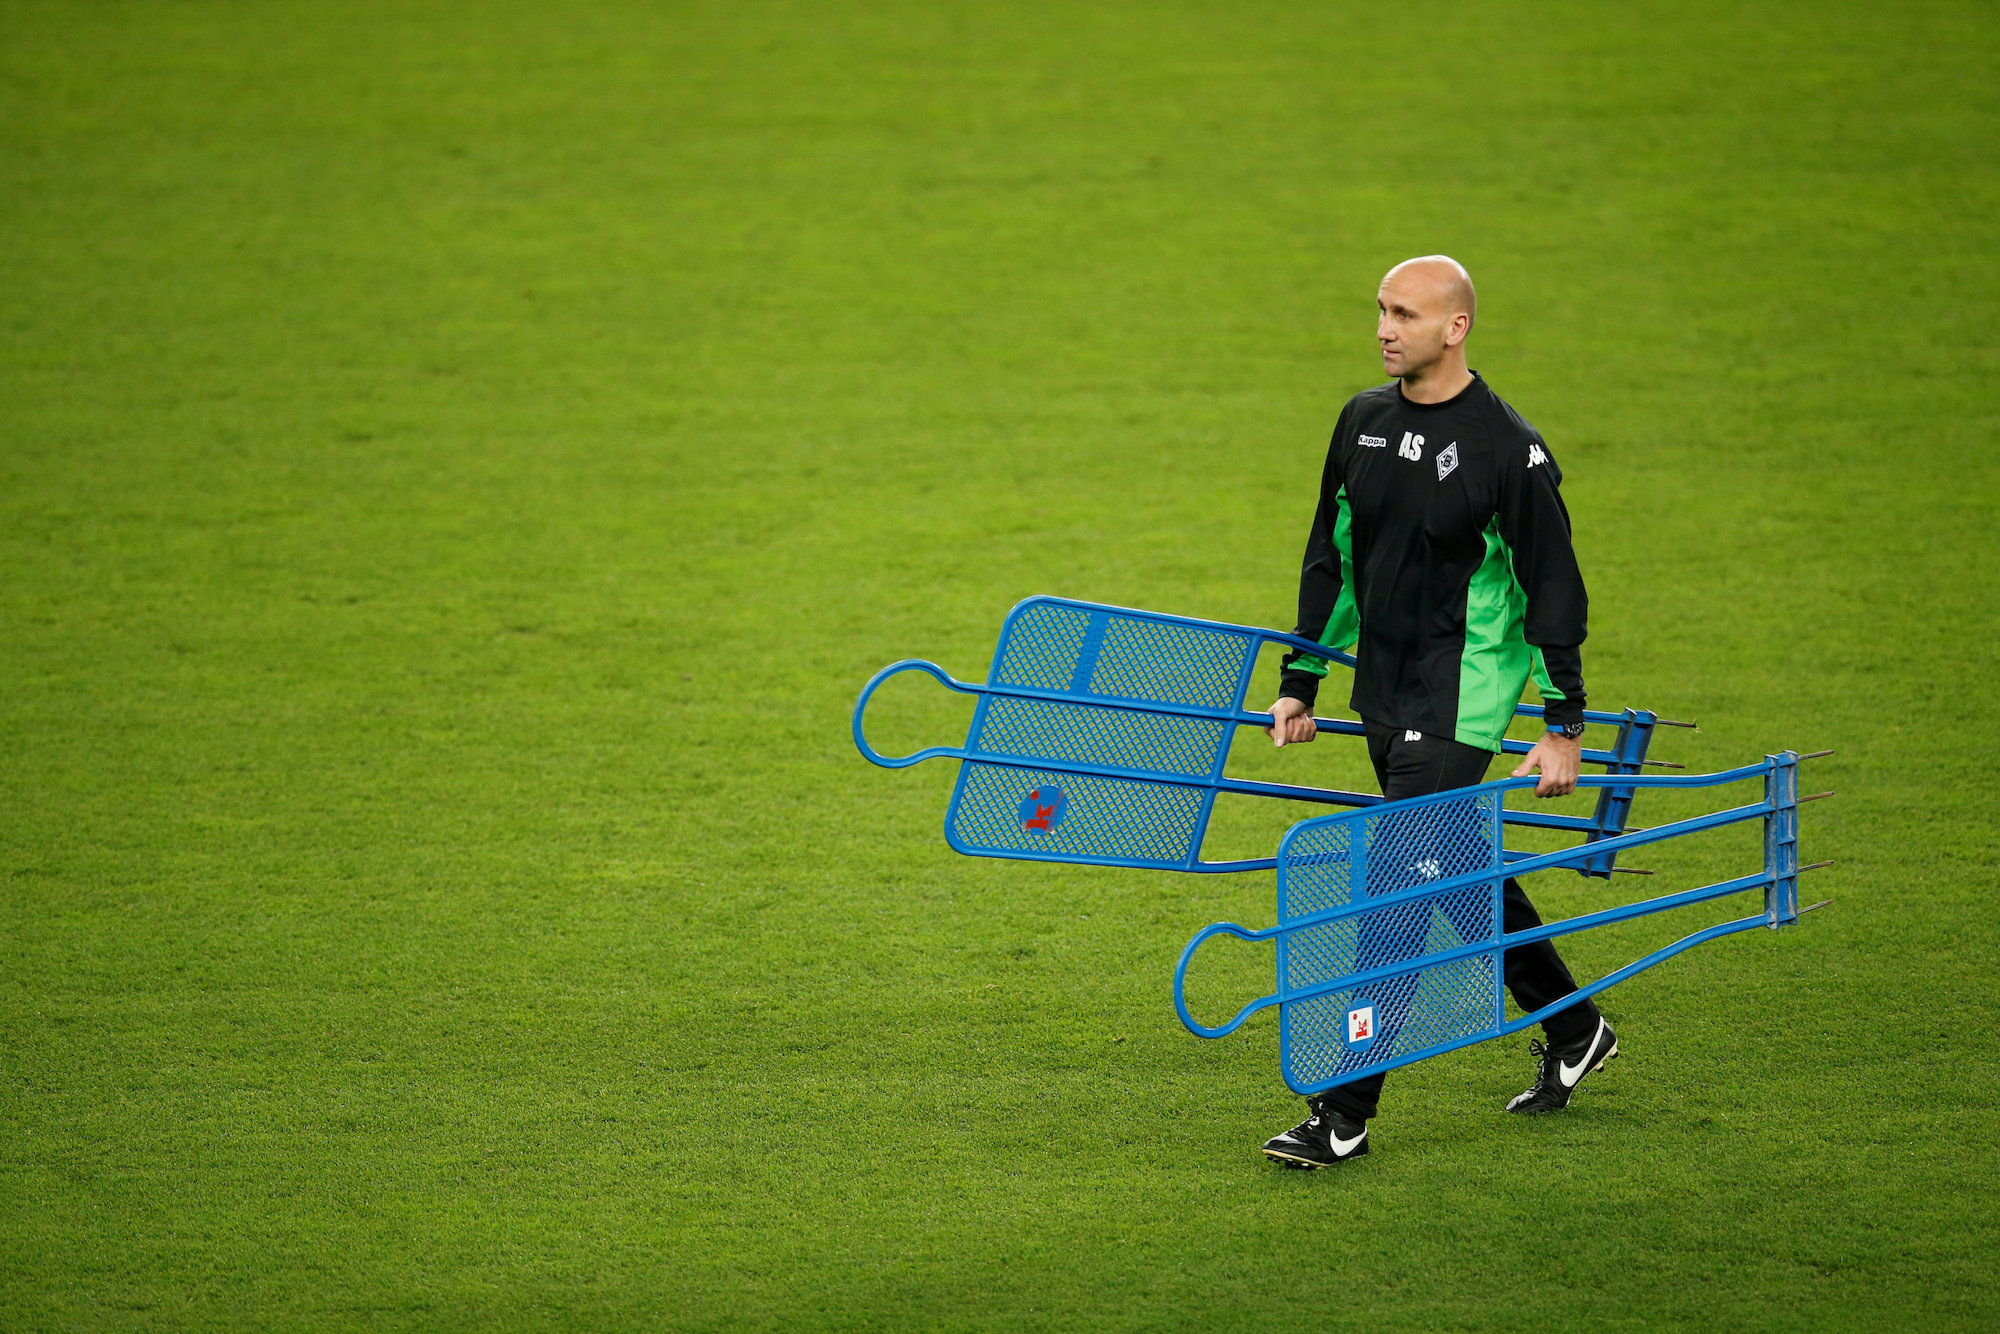 Football Soccer - Borussia Moenchengladbach training session - UEFA Champions League - Camp Nou stadium, Barcelona, Spain - 5/12/2016 - Borussia Moenchengladbach's coach Andre Schubert attends training session before the match against Barcelona. REUTERS/ Albert Gea